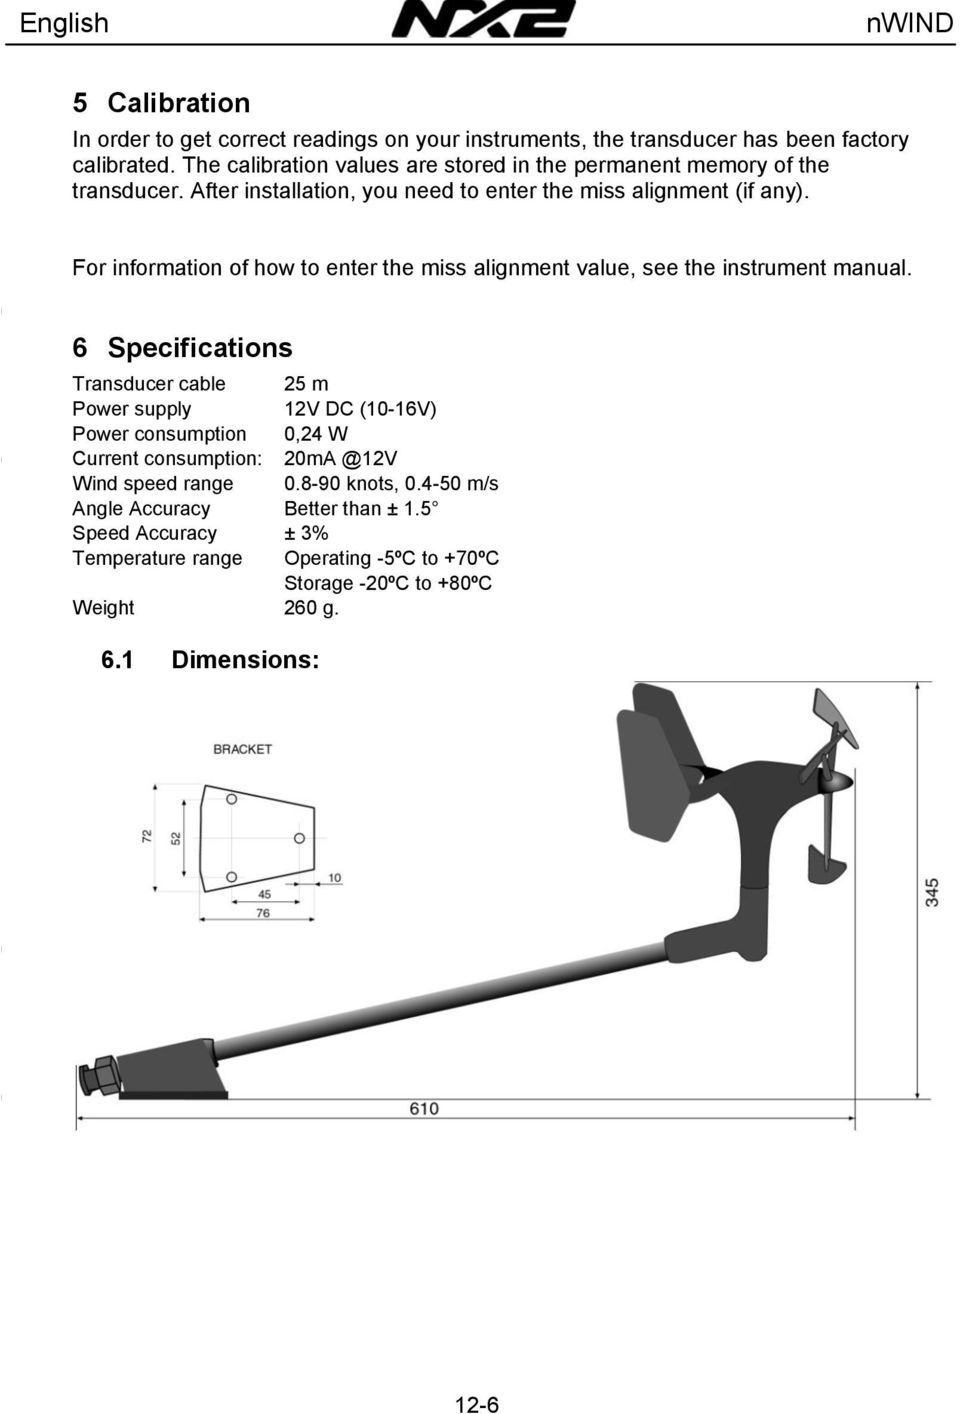 For information of how to enter the miss alignment value, see the instrument manual.